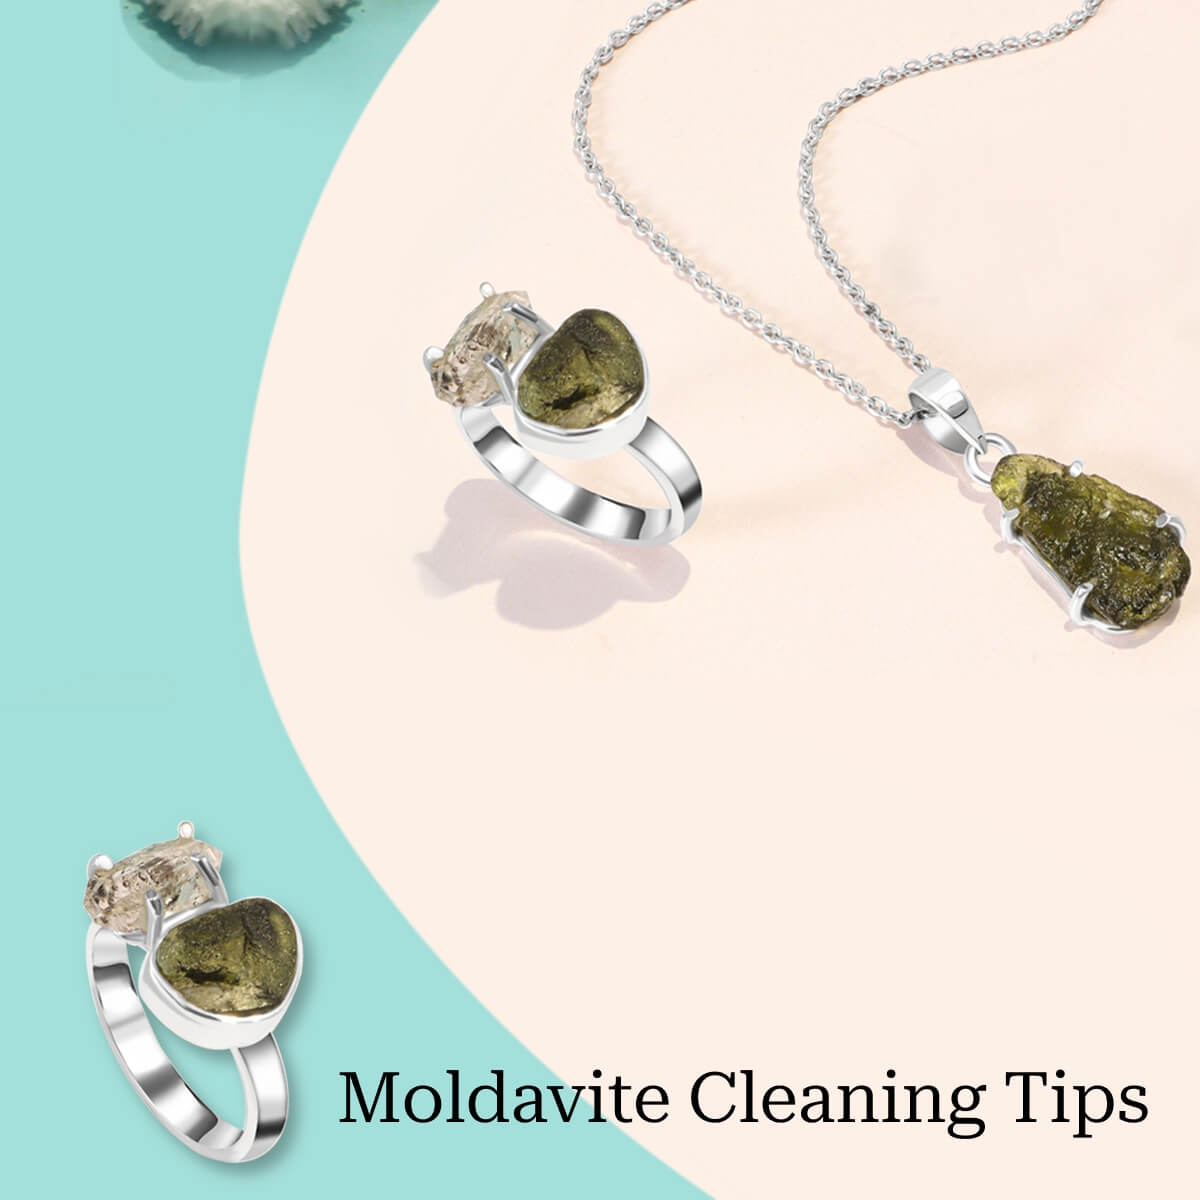 How To Cleanse Your Moldavite